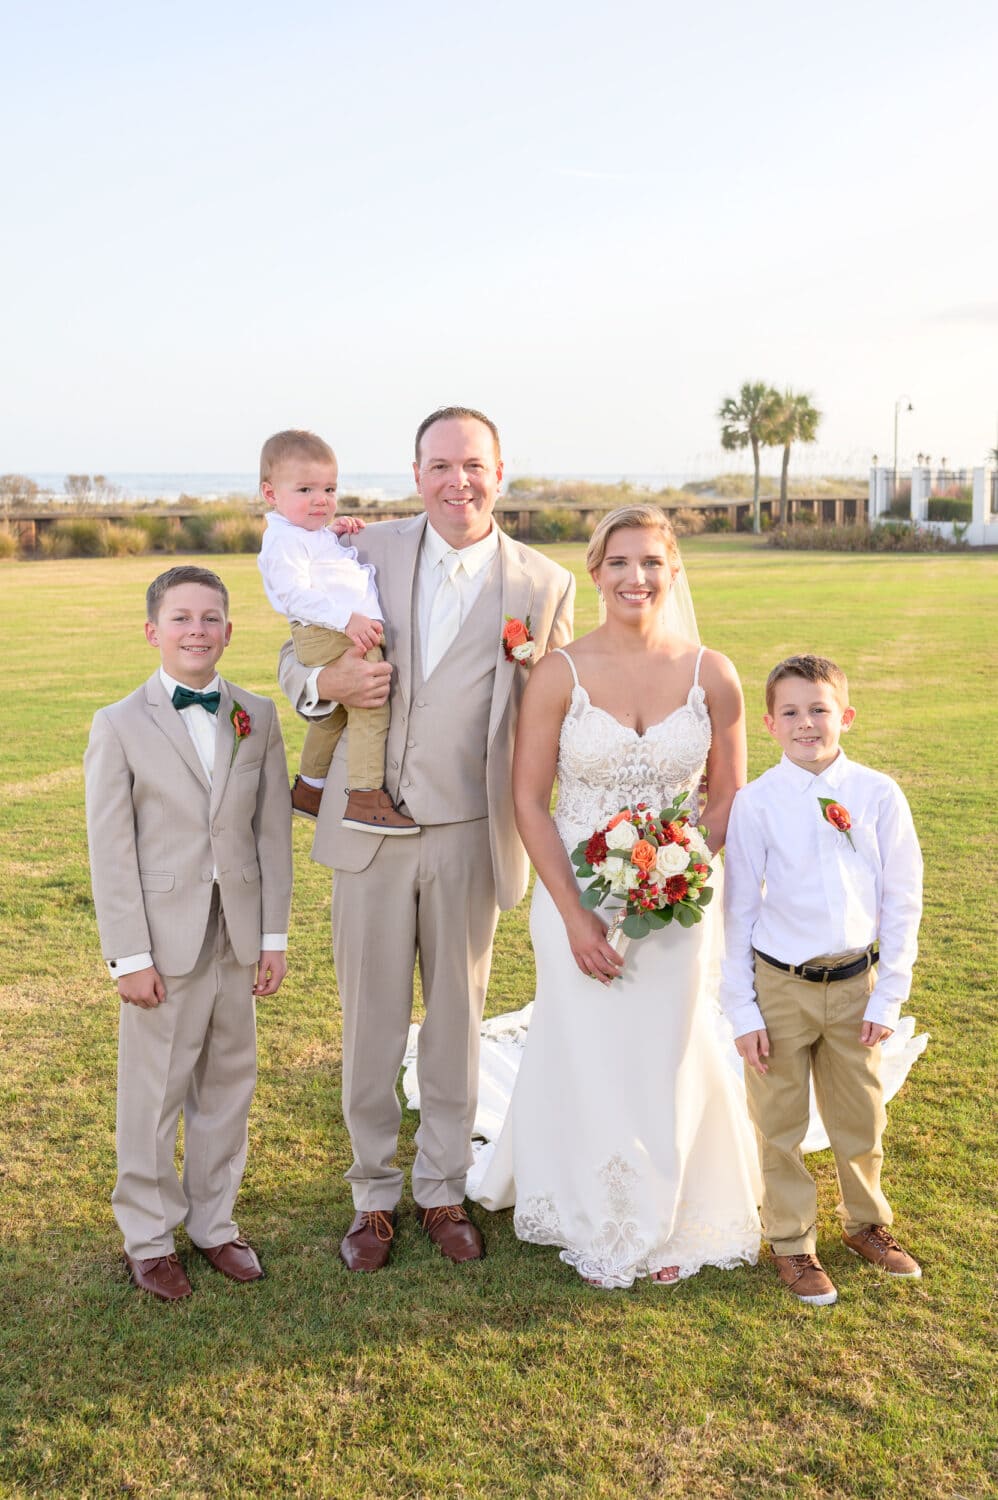 Happy new family of 5 after the wedding ceremony - Dunes Golf & Beach Club